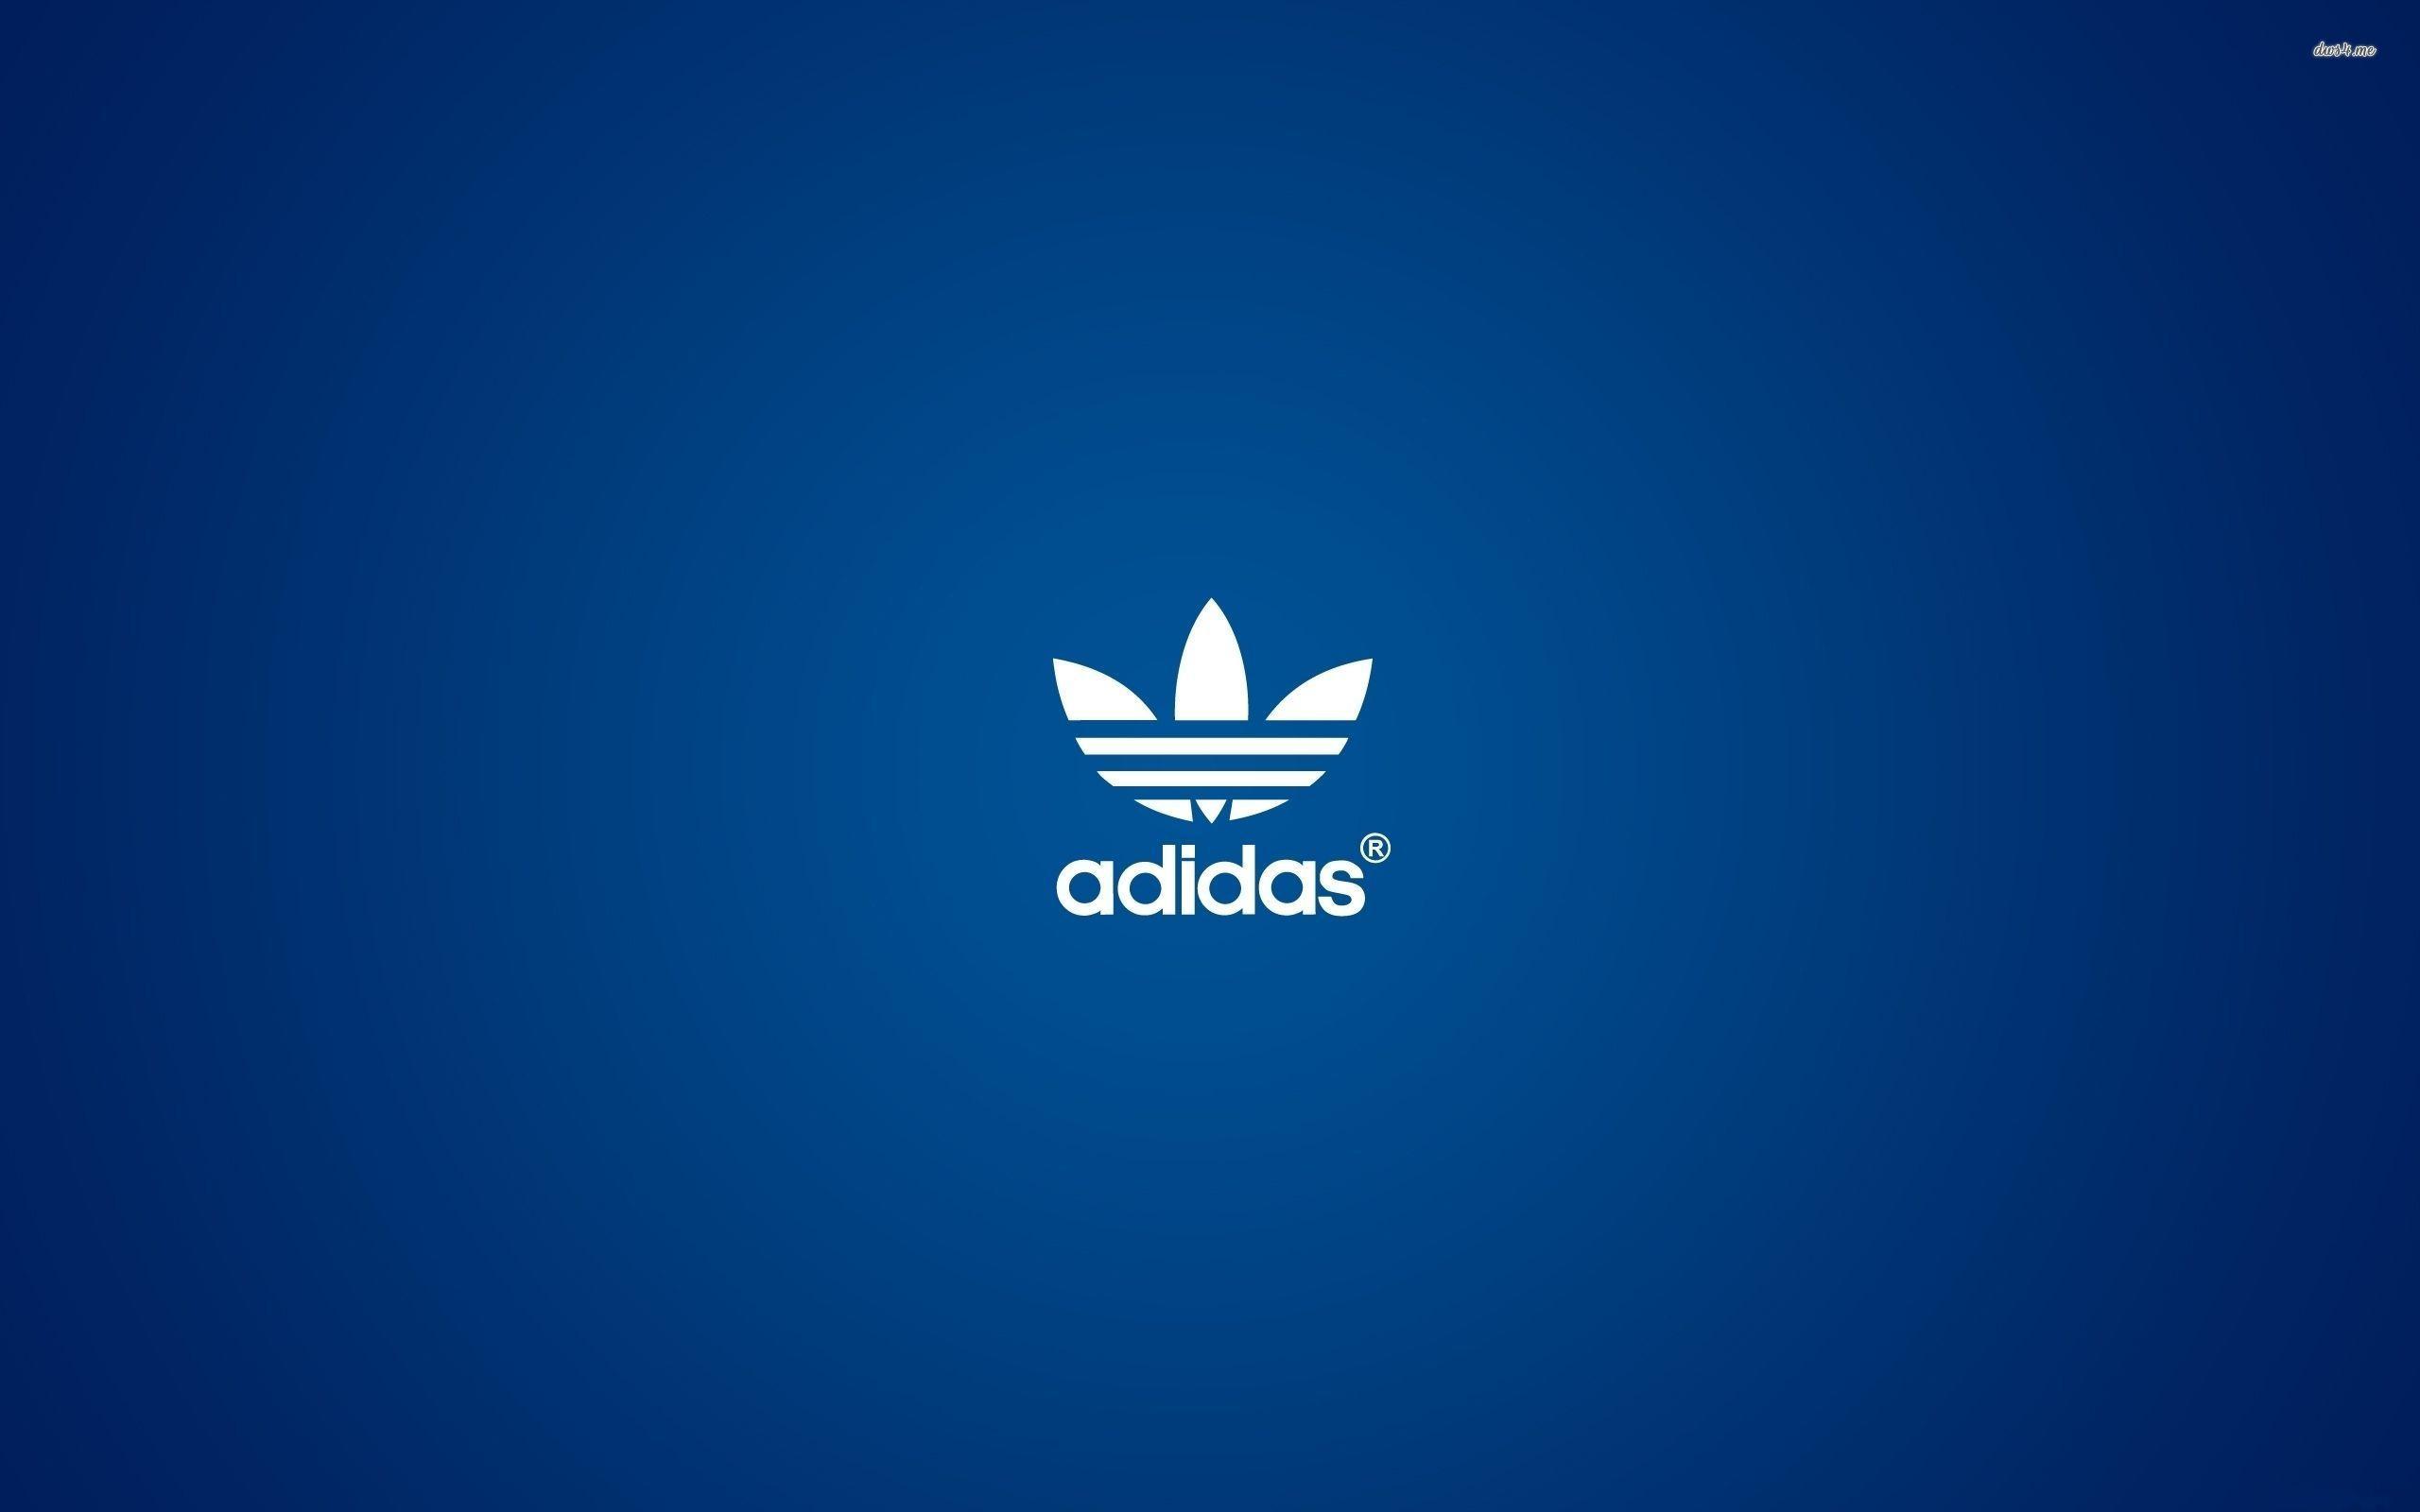 Adidas Best Wallpaper Hd For Pc, Adidas, Other